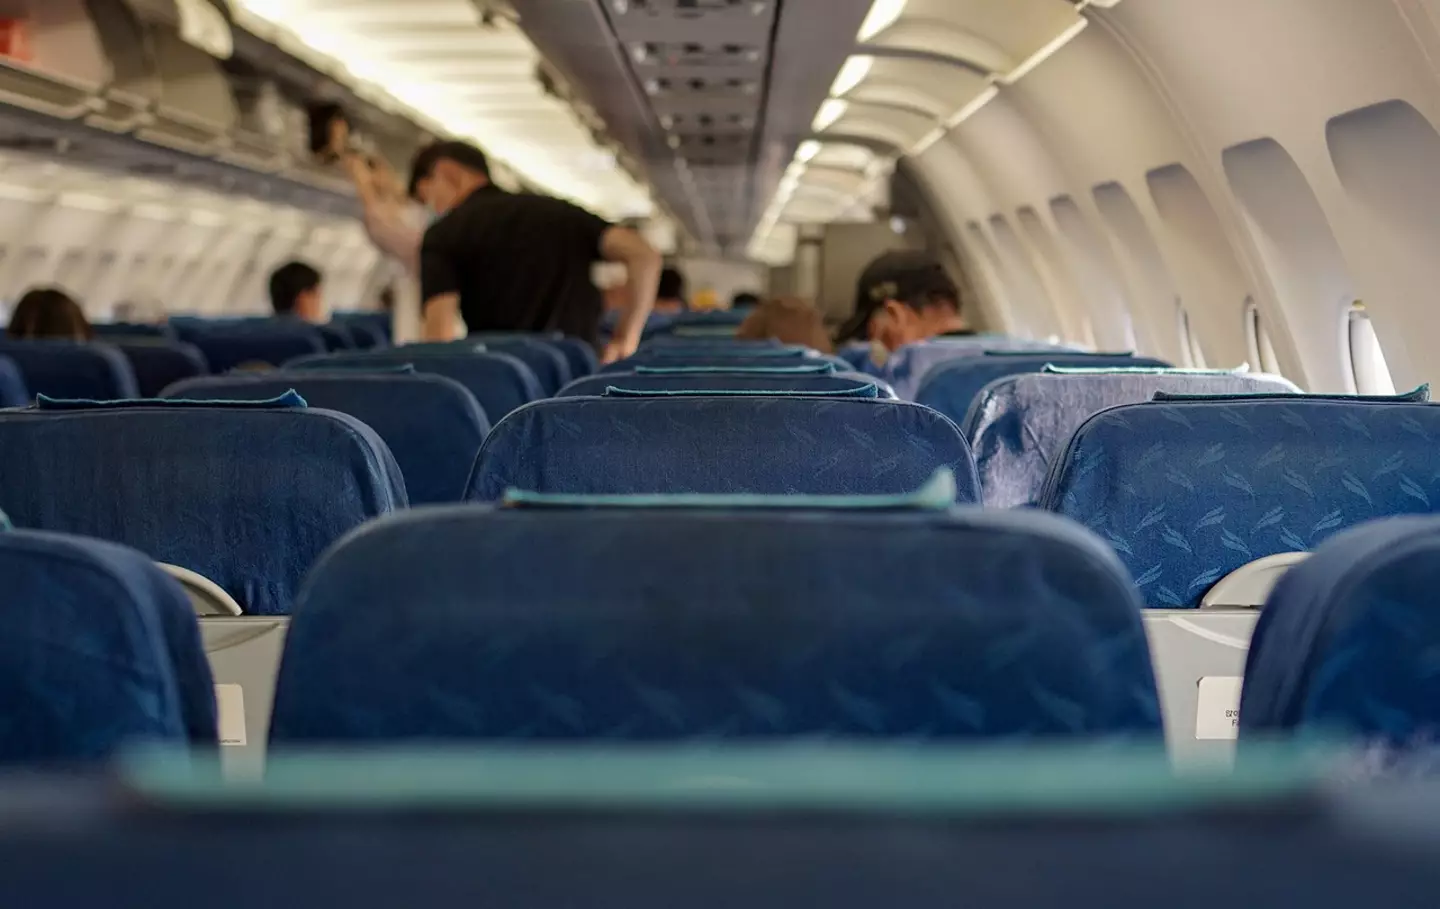 The passenger boarded a plane to find an older couple in his seats.